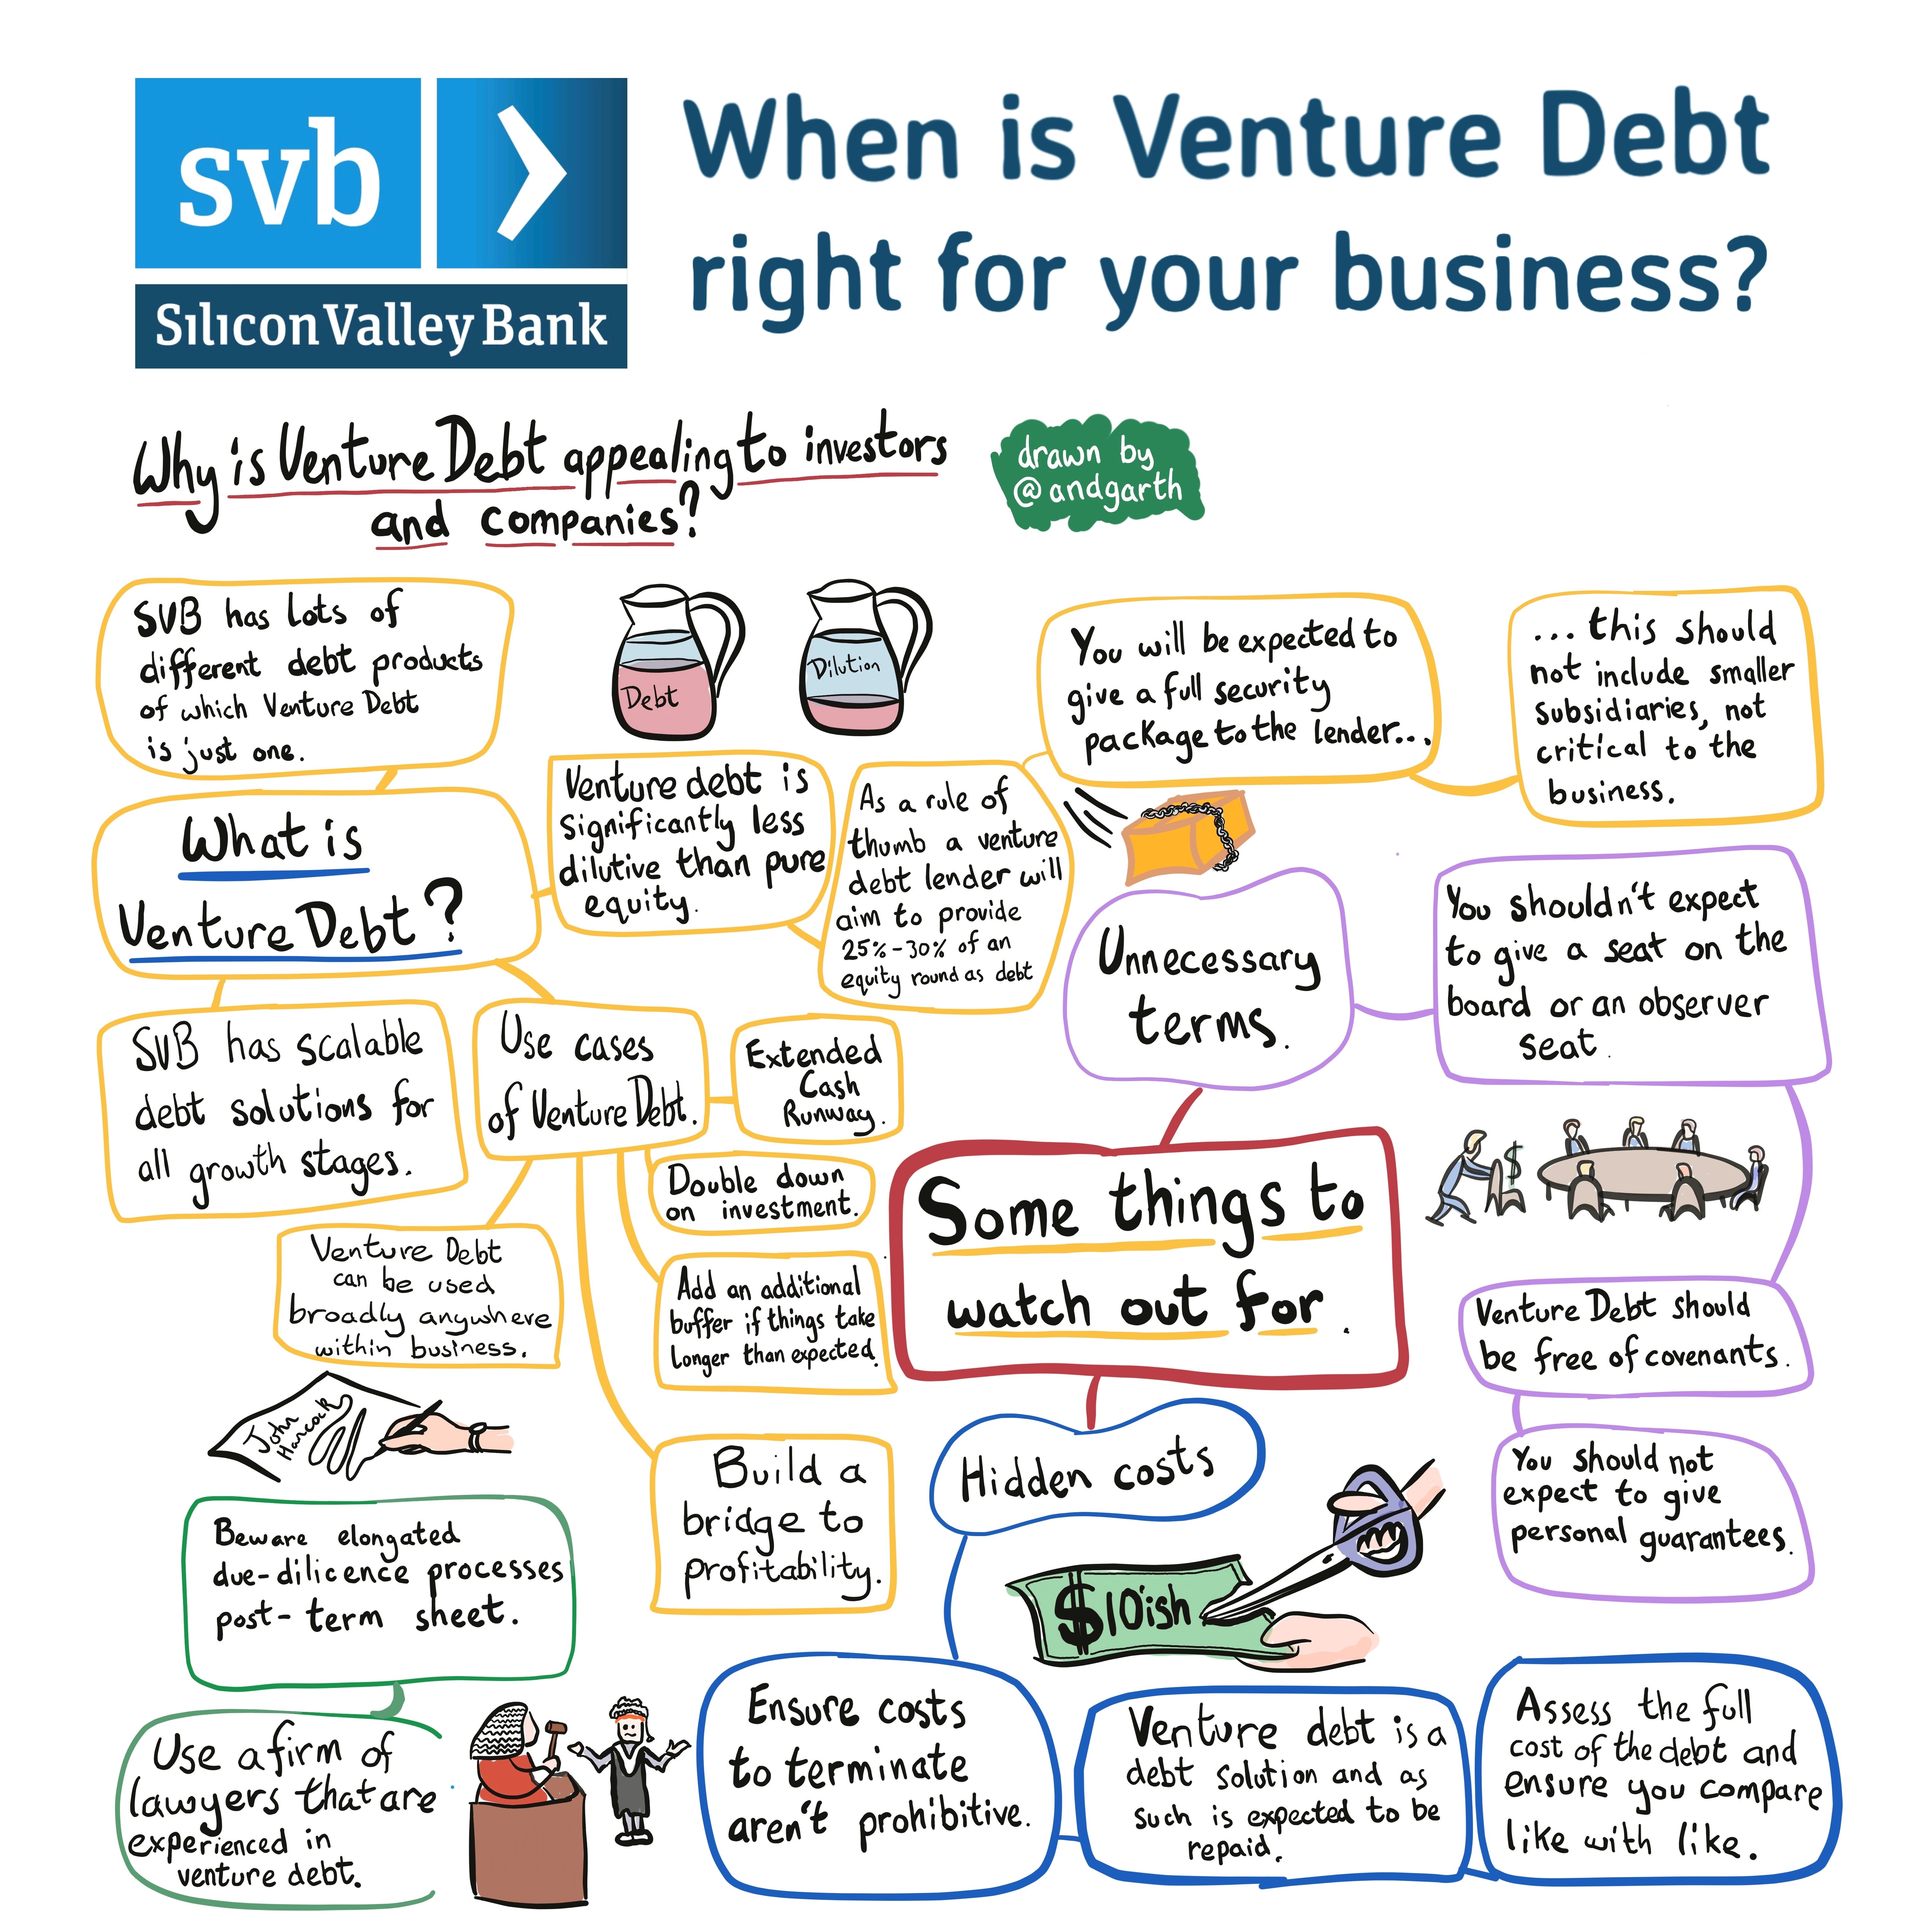 Where can one get advice on venture debt?